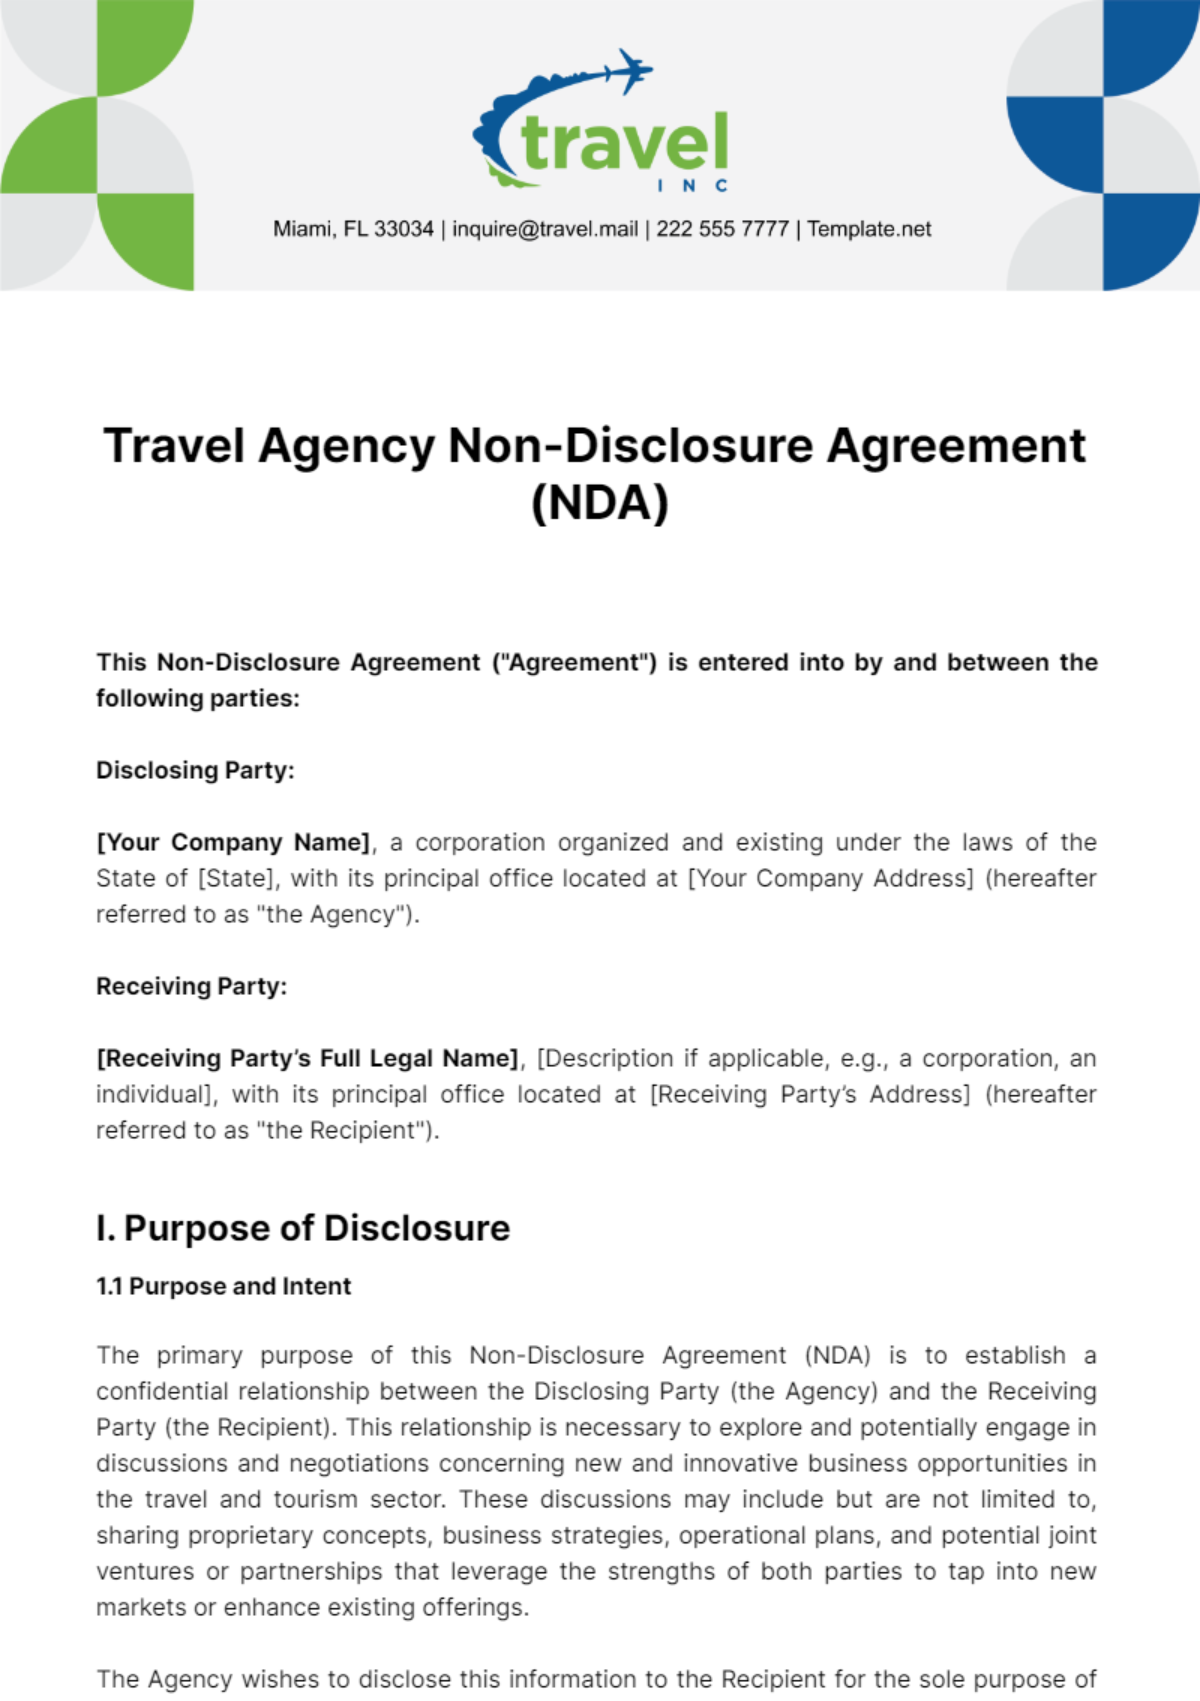 Travel Agency Non-Disclosure Agreement Template